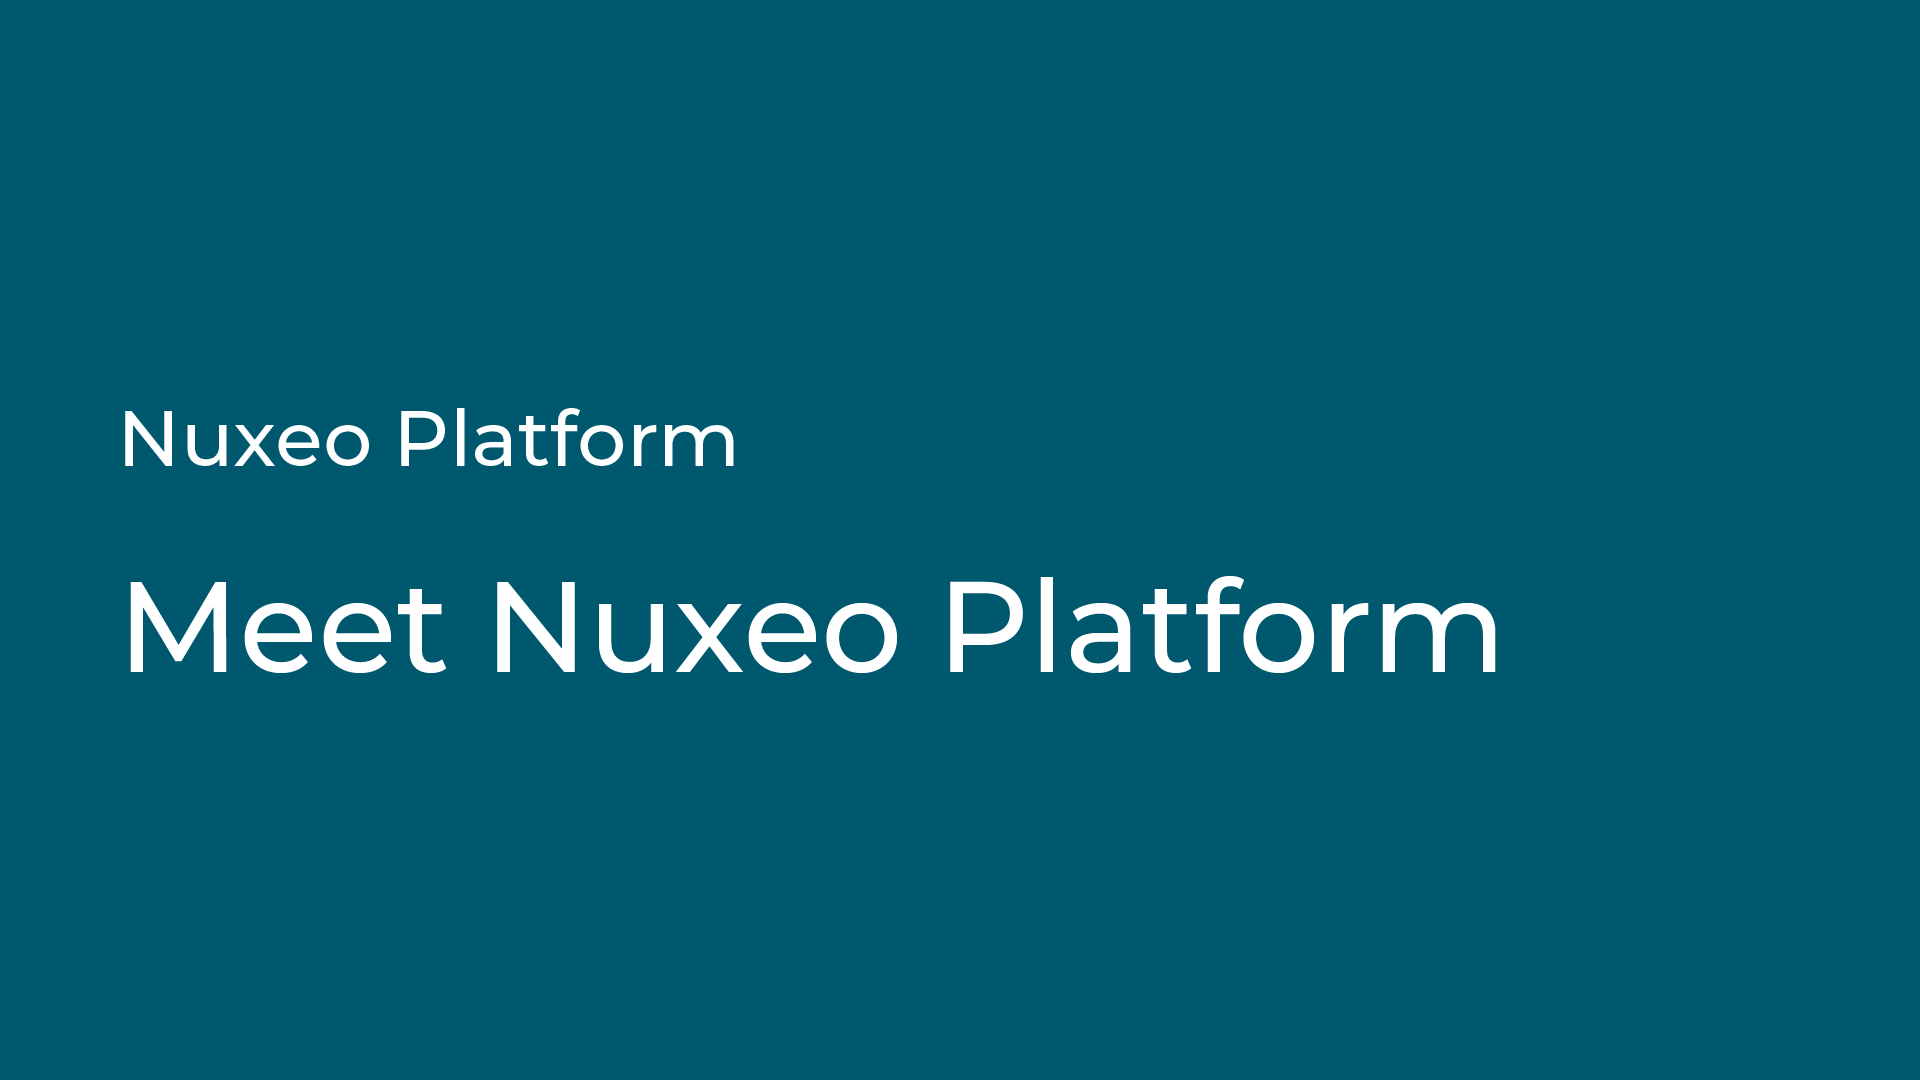 What is Nuxeo Platform